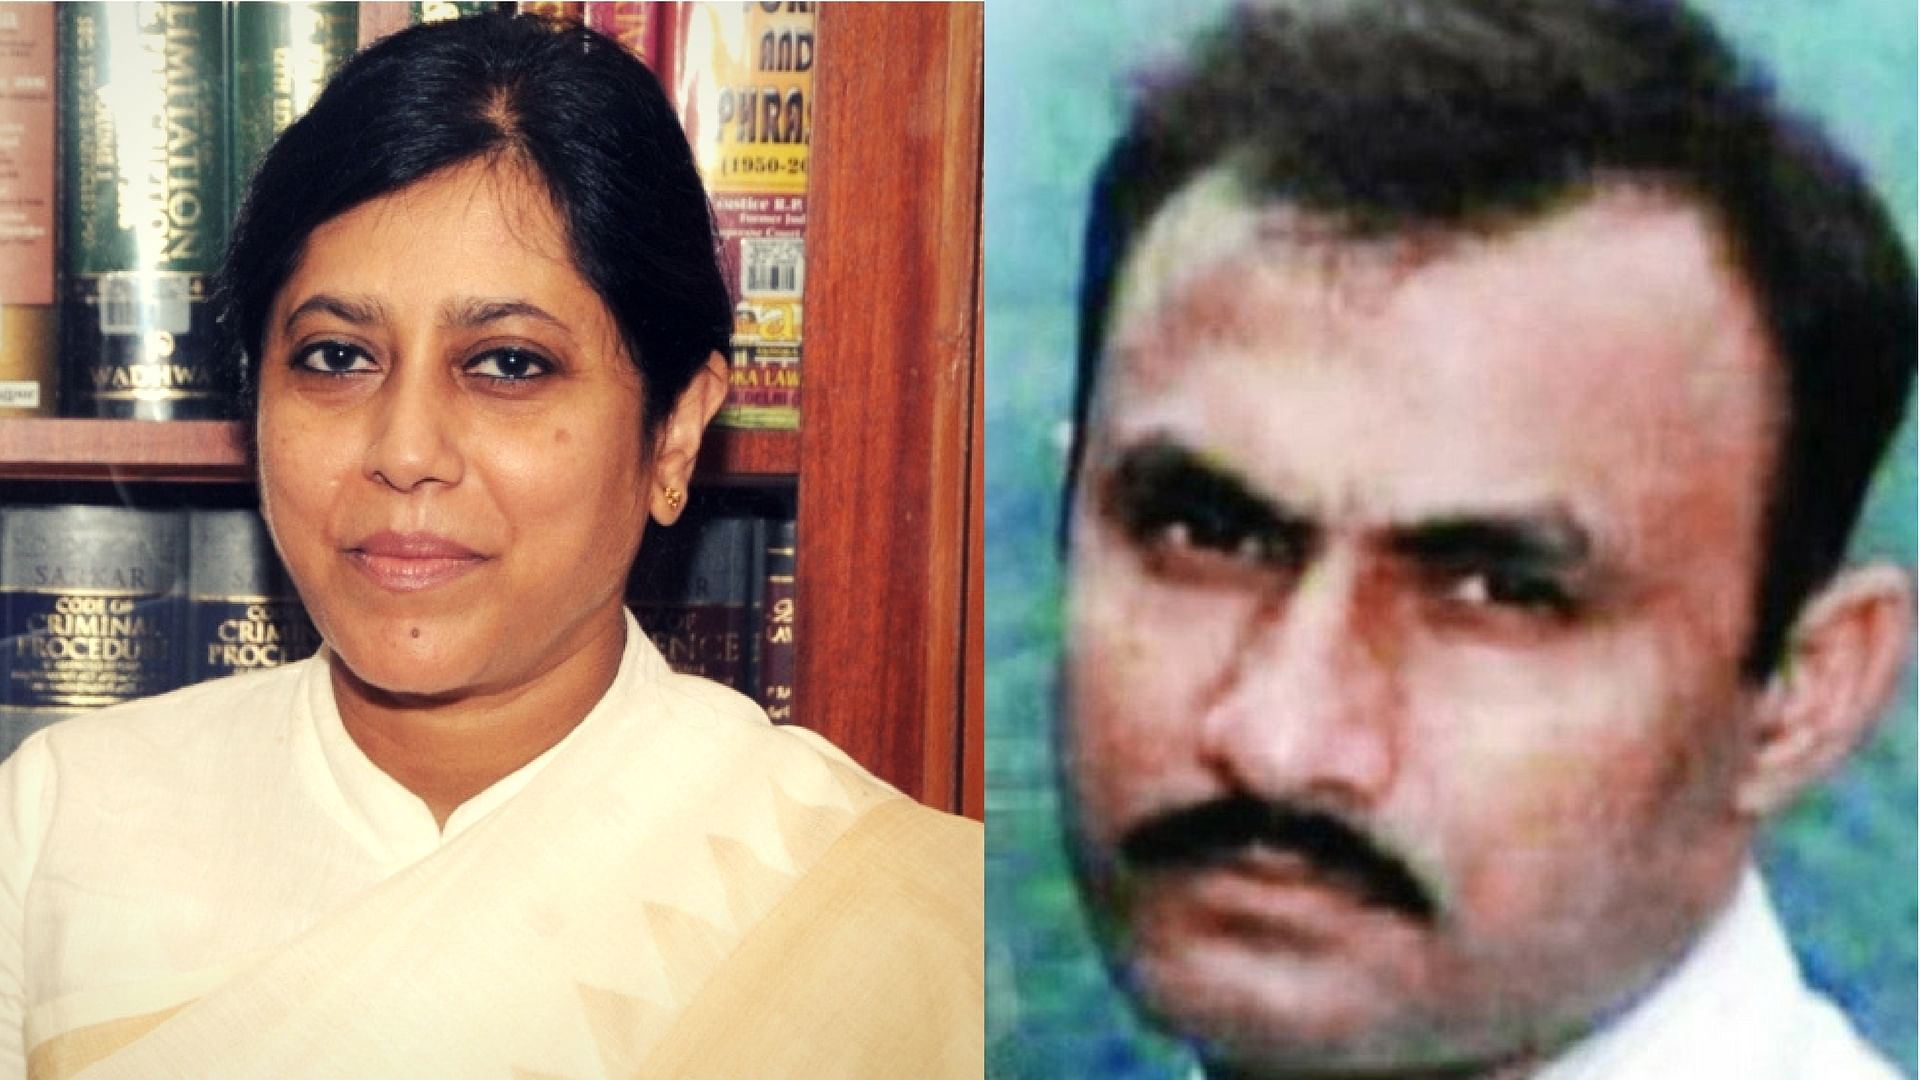 Justice Revati Mohite Dere, who was conducting daily hearings related to the Sohrabuddin case, has been reassigned.